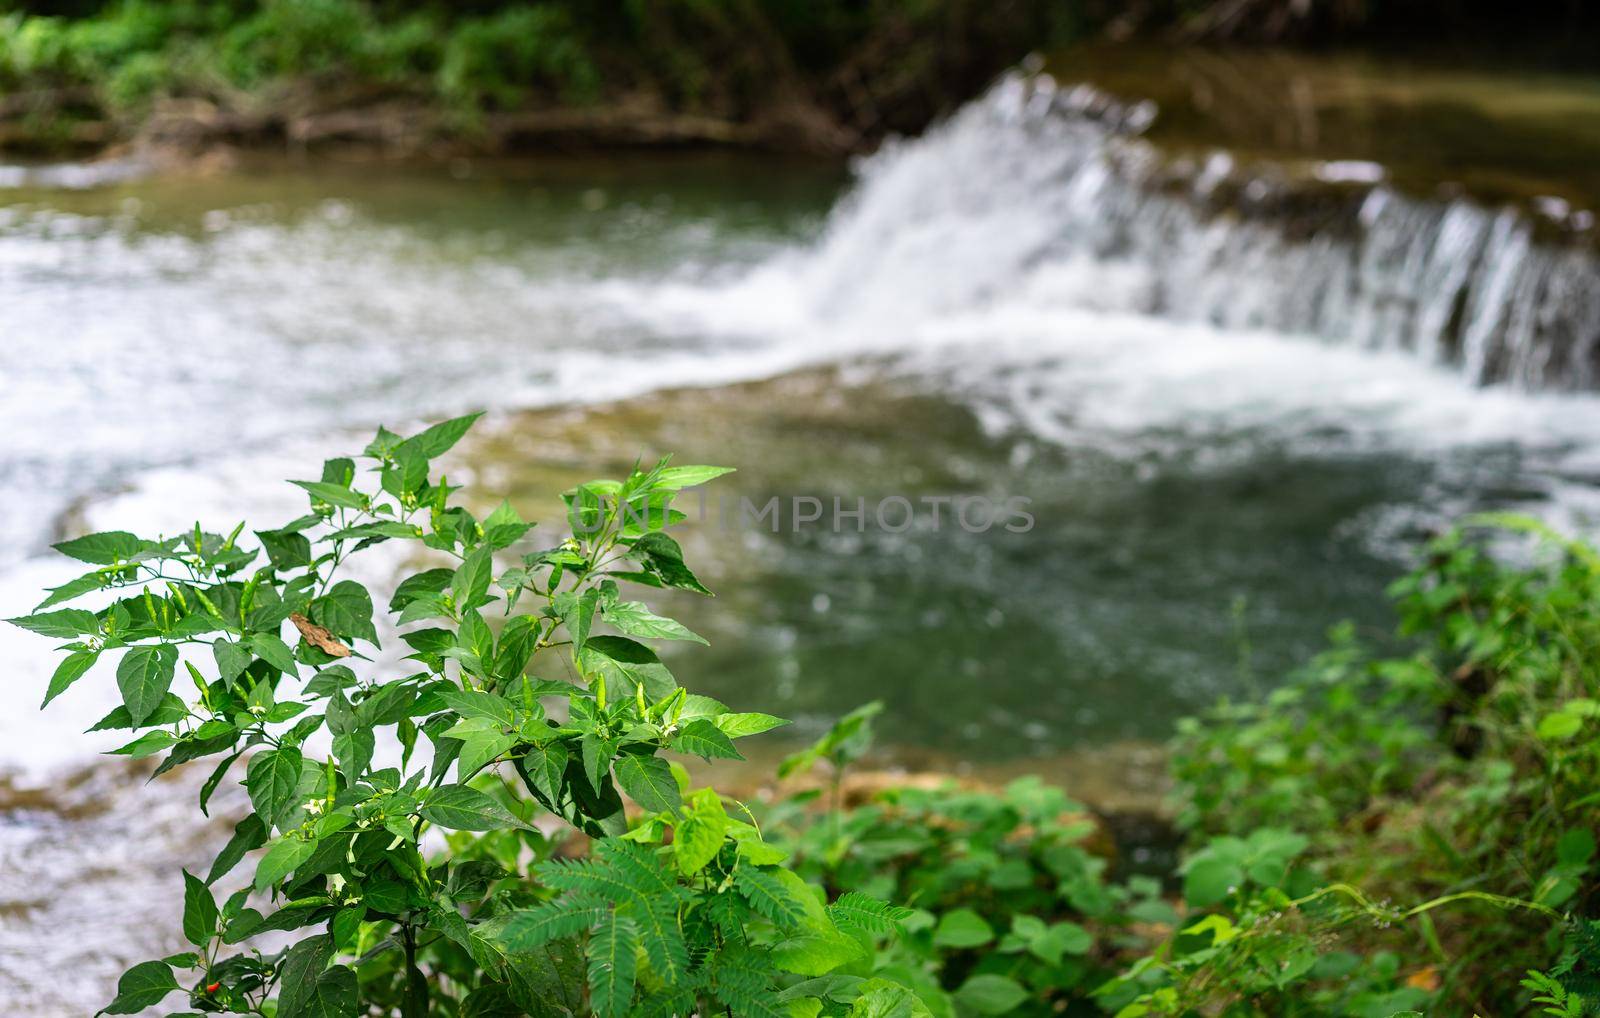 Green chili peppers on the tree with waterfall background